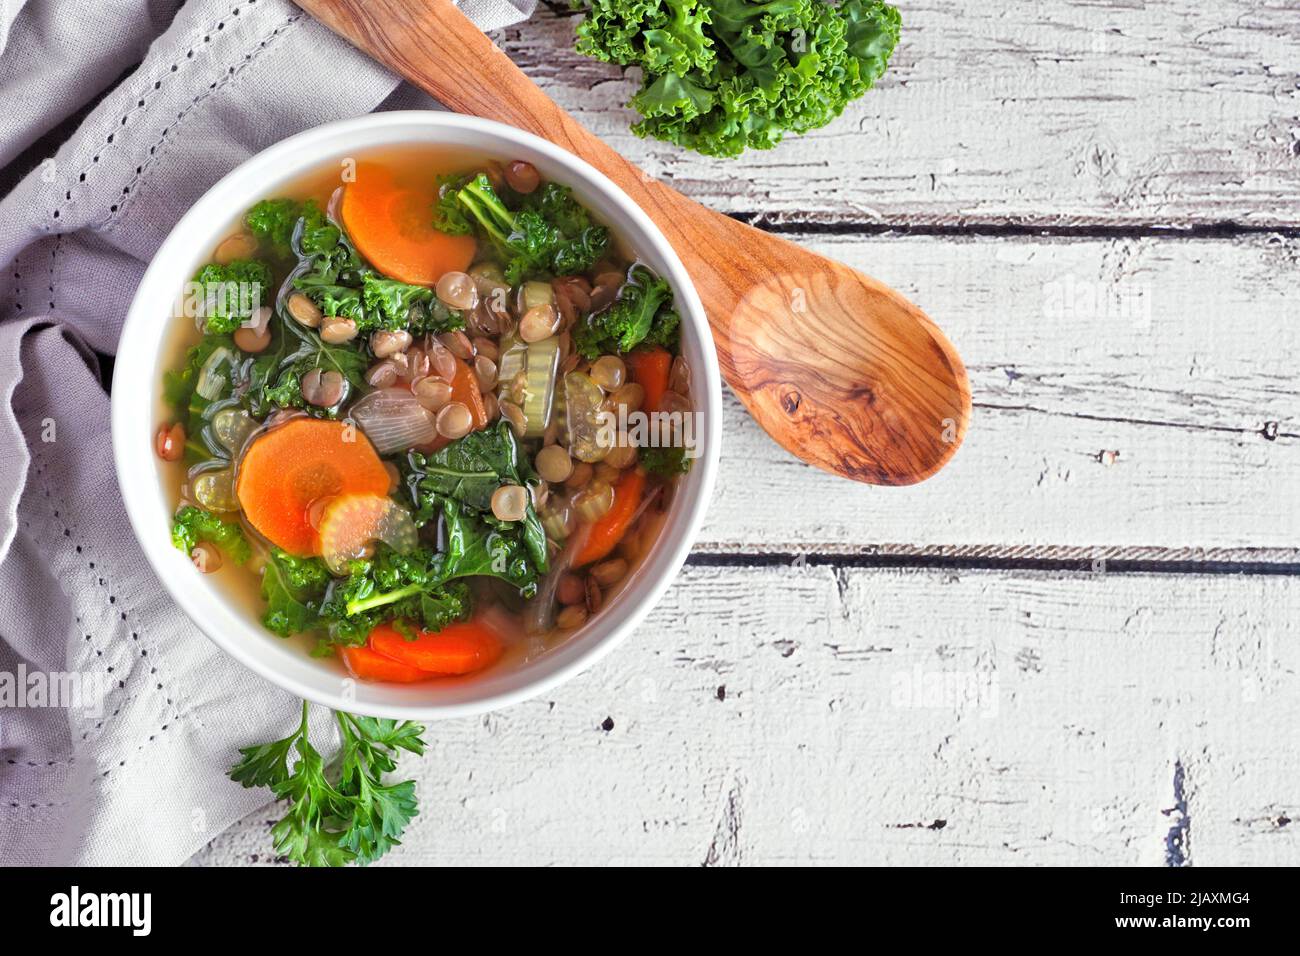 Healthy vegetable soup with kale and lentils. Overhead view table scene on a rustic white wood background. Stock Photo